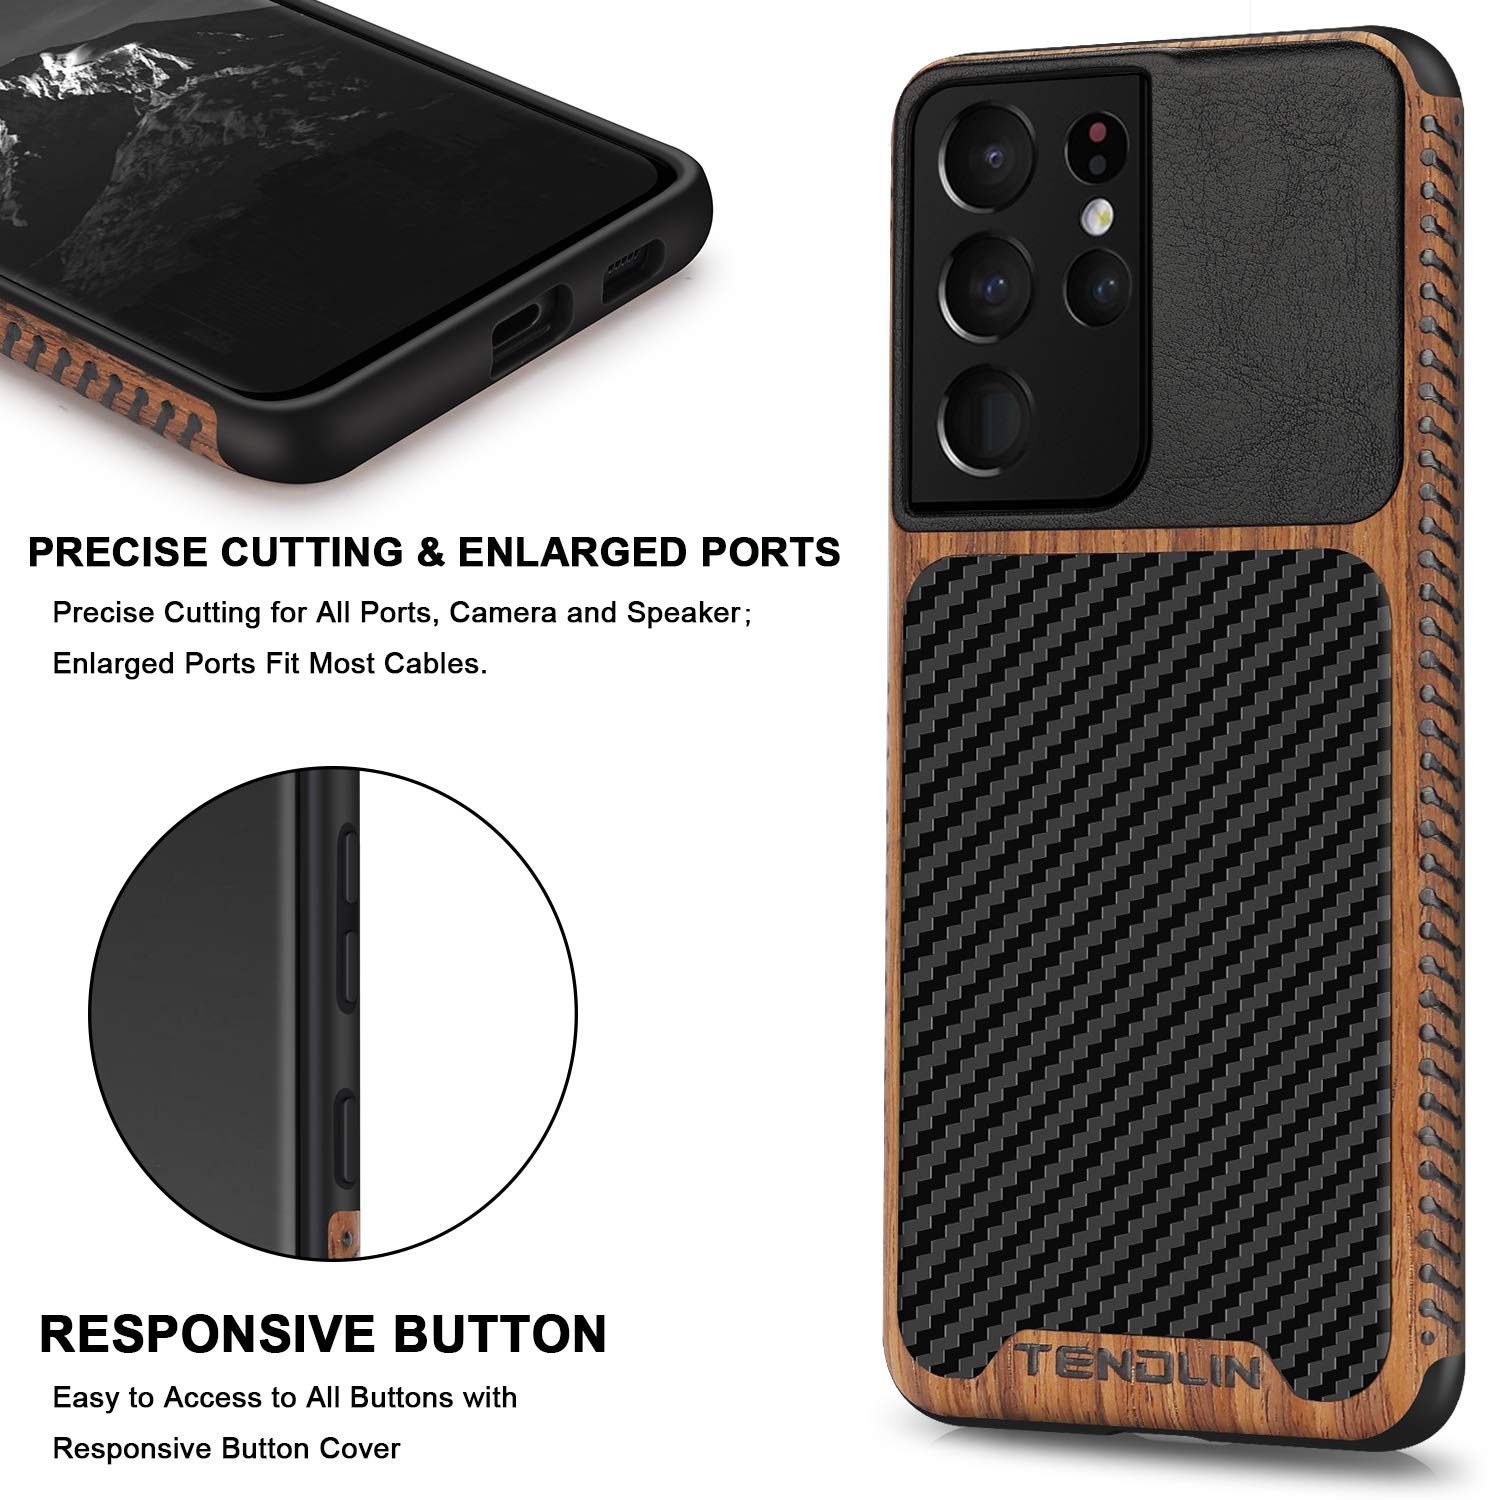 TENDLIN Compatible with Samsung Galaxy S21 Ultra Case Wood Grain with Carbon Fiber Texture Design Leather Hybrid Case (Black)